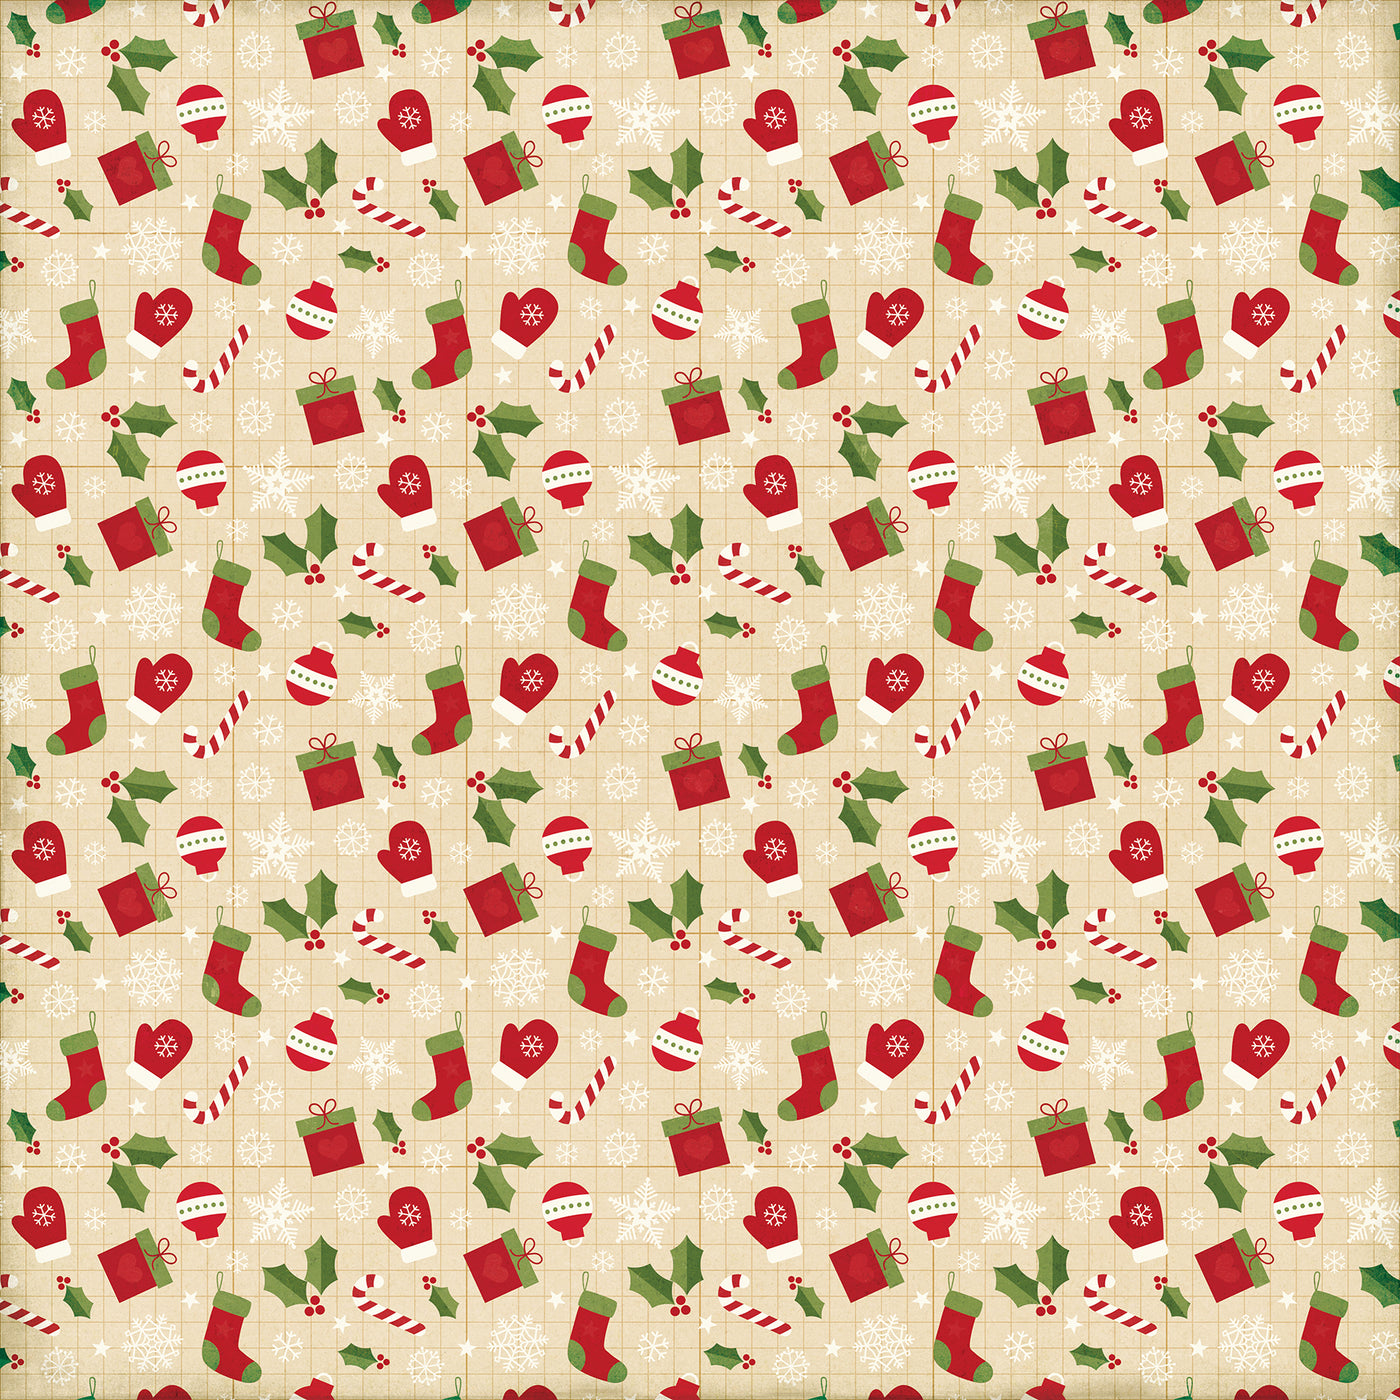 Side A - Christmas icons, stockings, mittens, candy canes, and holly on a tan background